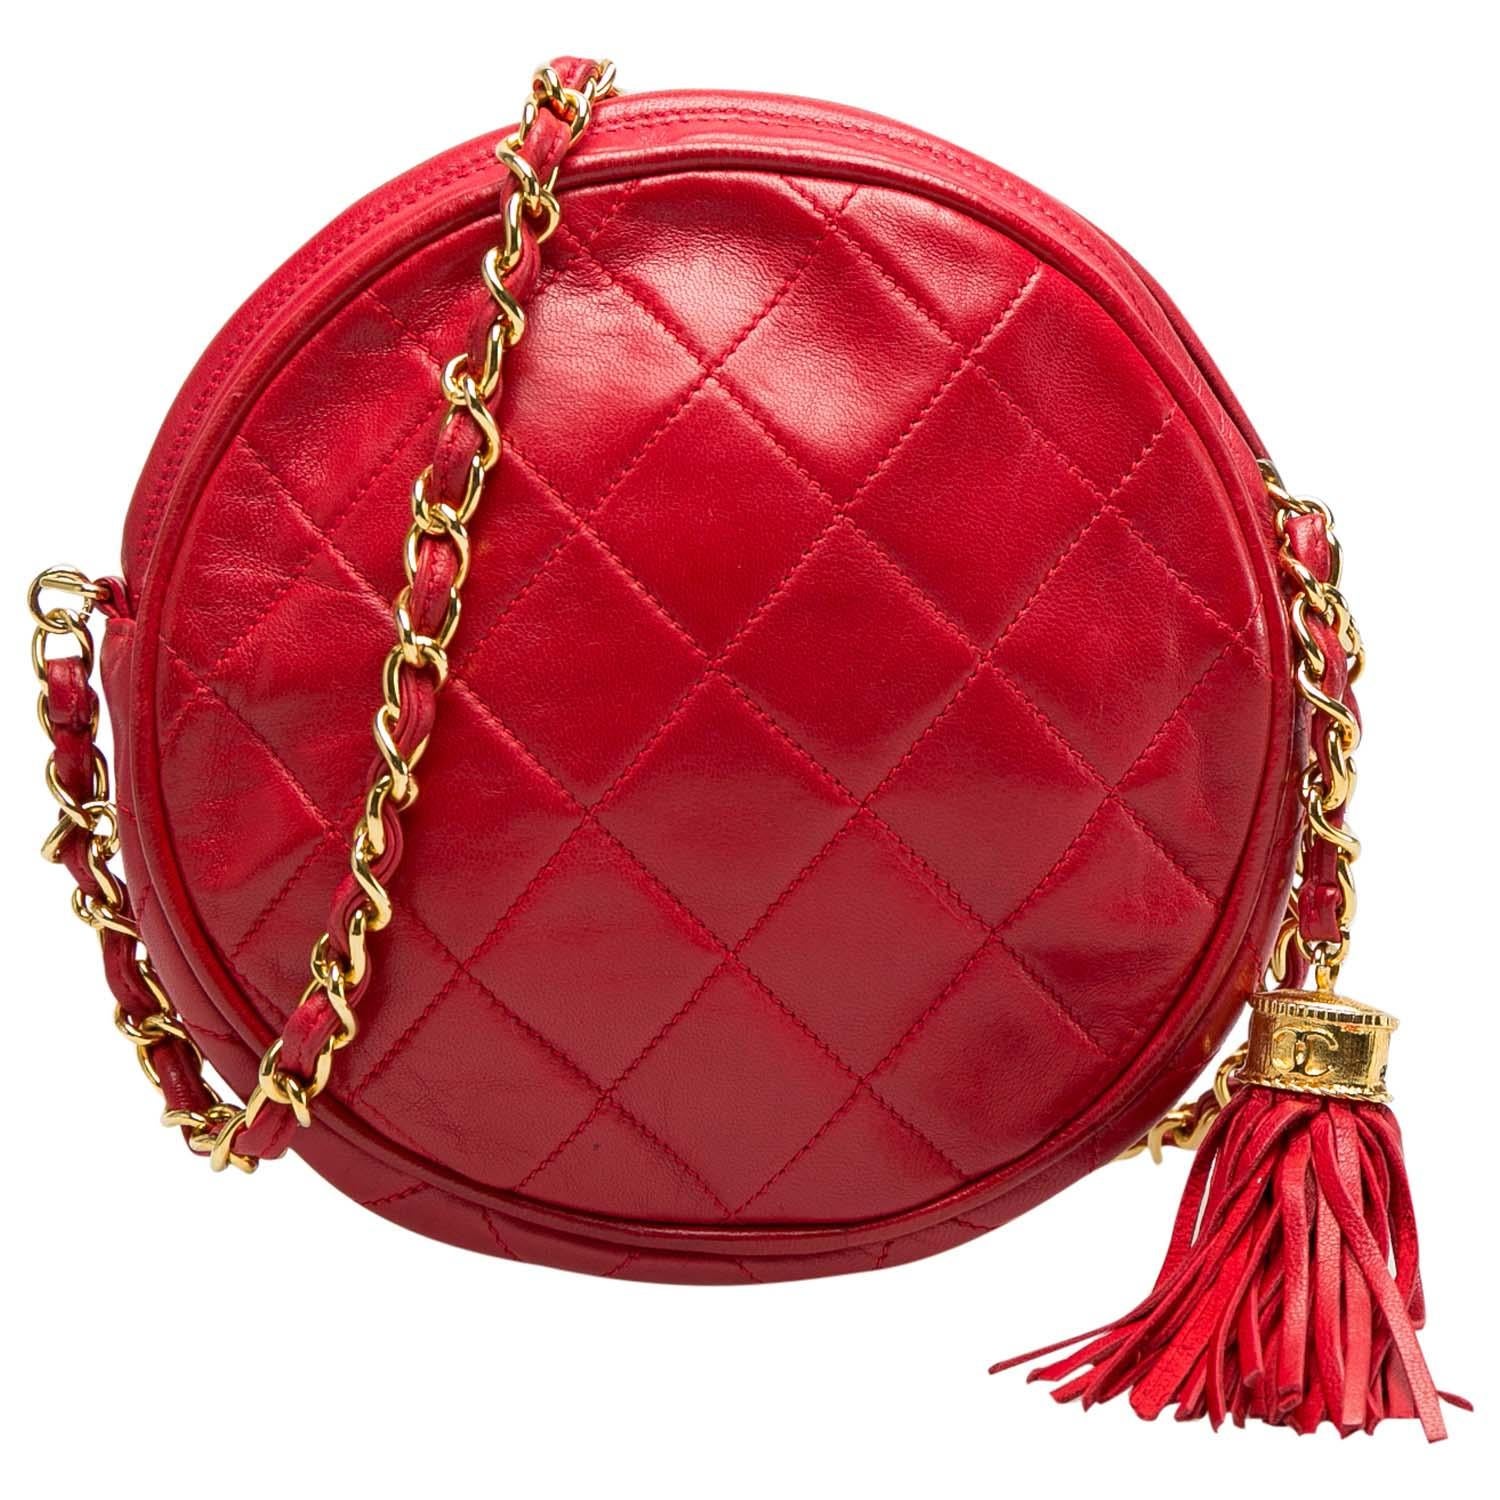 Designed to last, this beautiful bag from Chanel can elevate the look of your apparel in no time. Comfortable and easy to carry, this leather creation is simply a must-have for your wardrobe upgrade. It is crafted into a round shape and features the